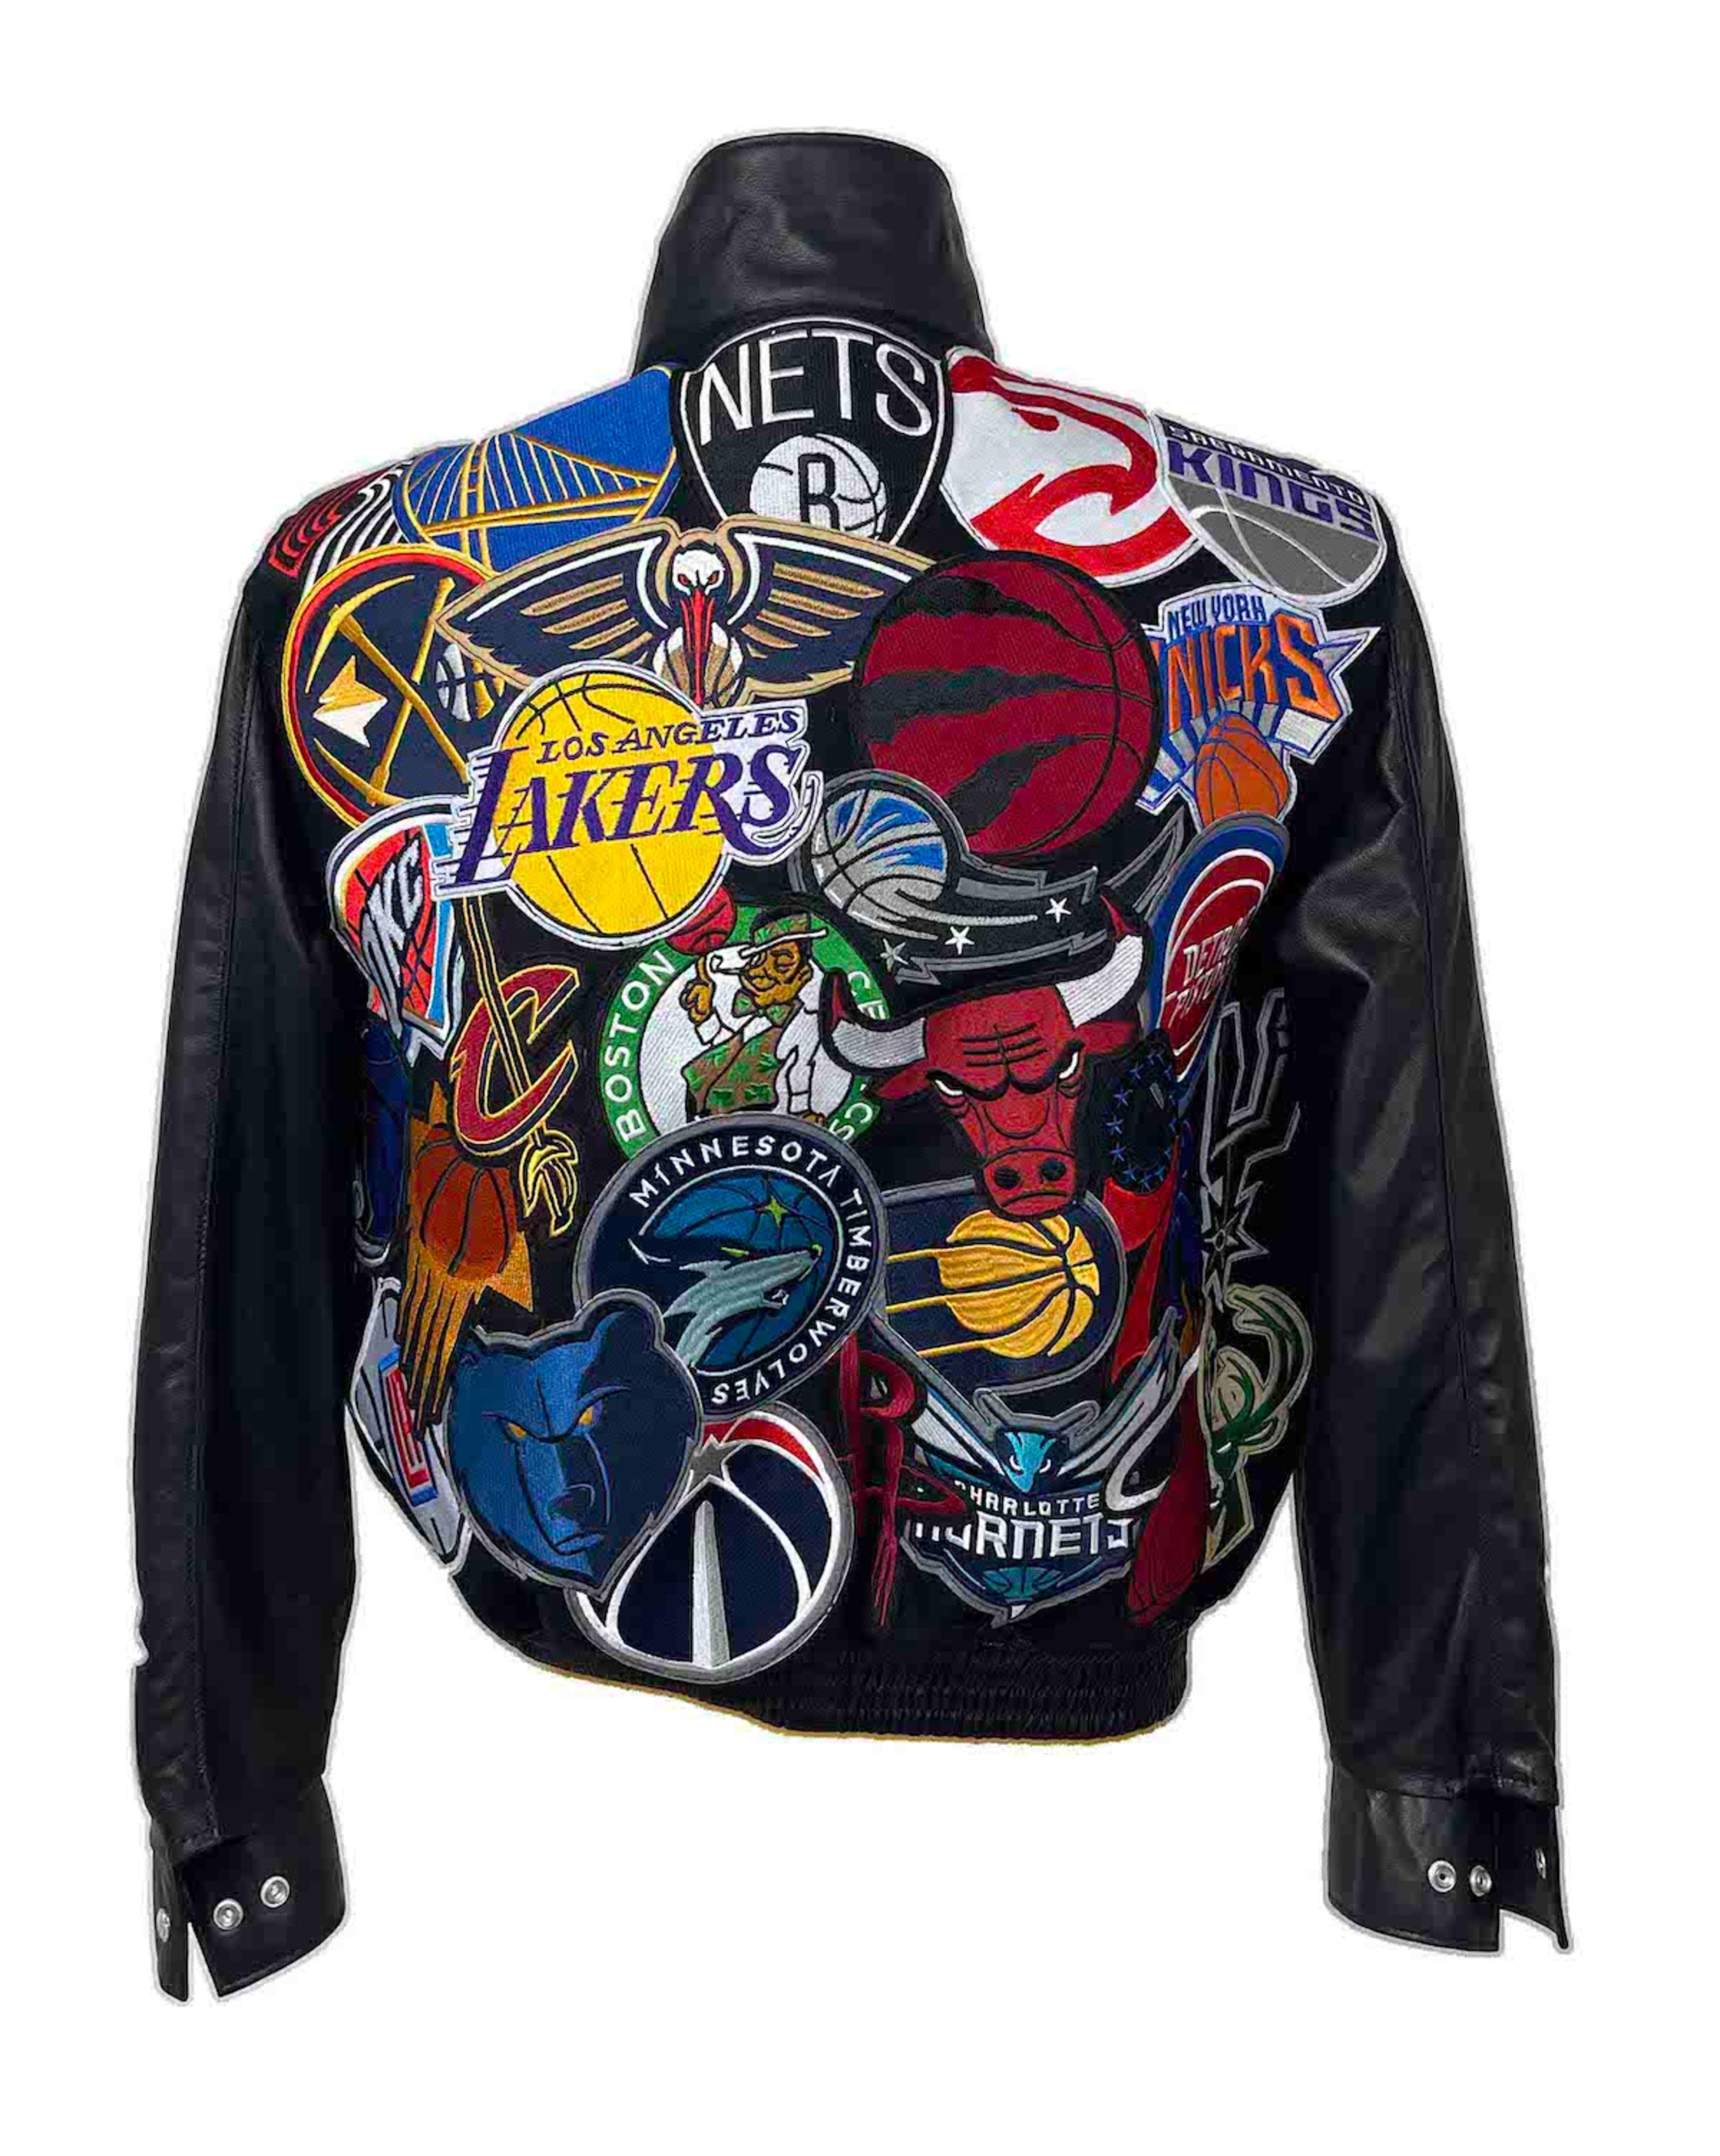 NBA MEGAPATCH WOOL & LEATHER Black